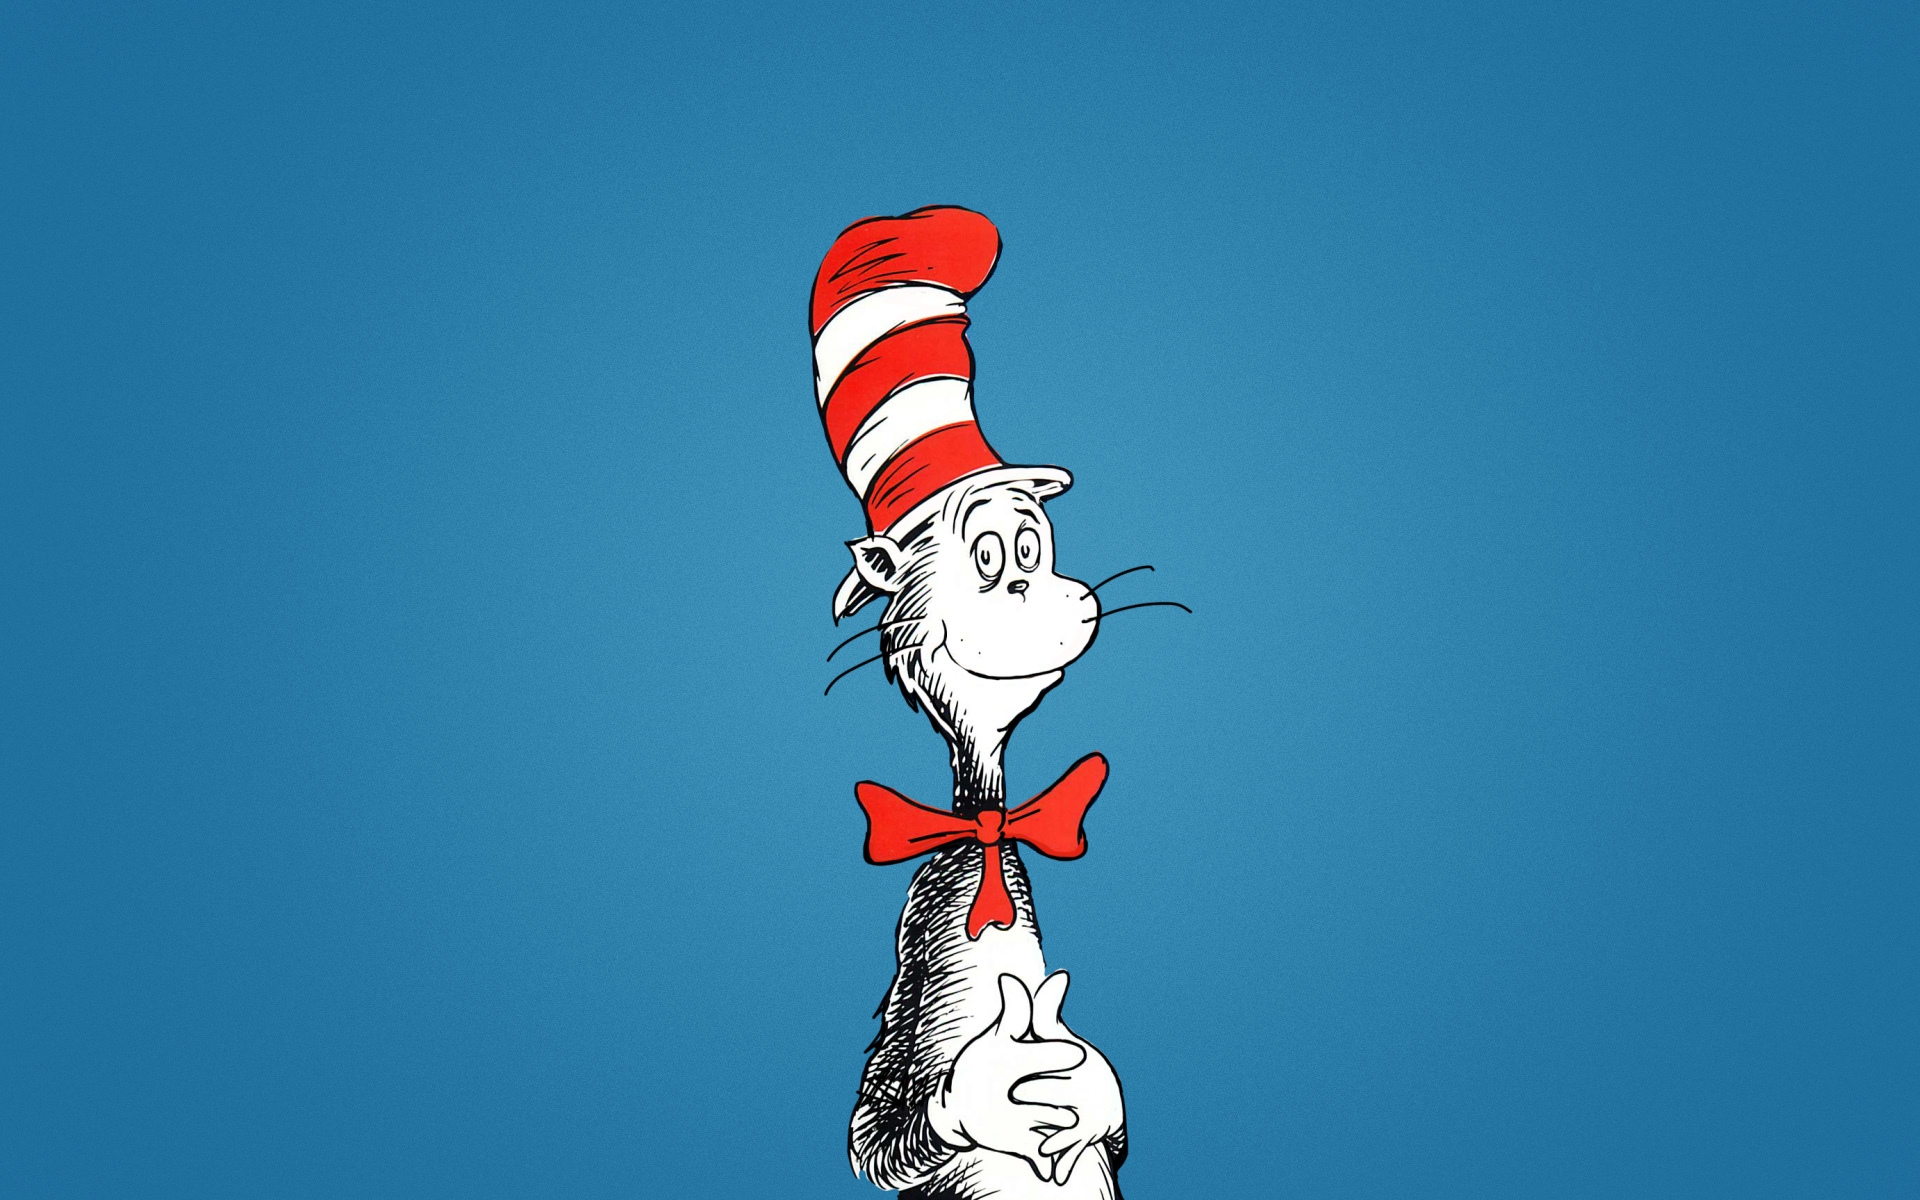 1 Dr. Seuss: The Cat In The Hat HD Wallpapers | Backgrounds - Wallpaper